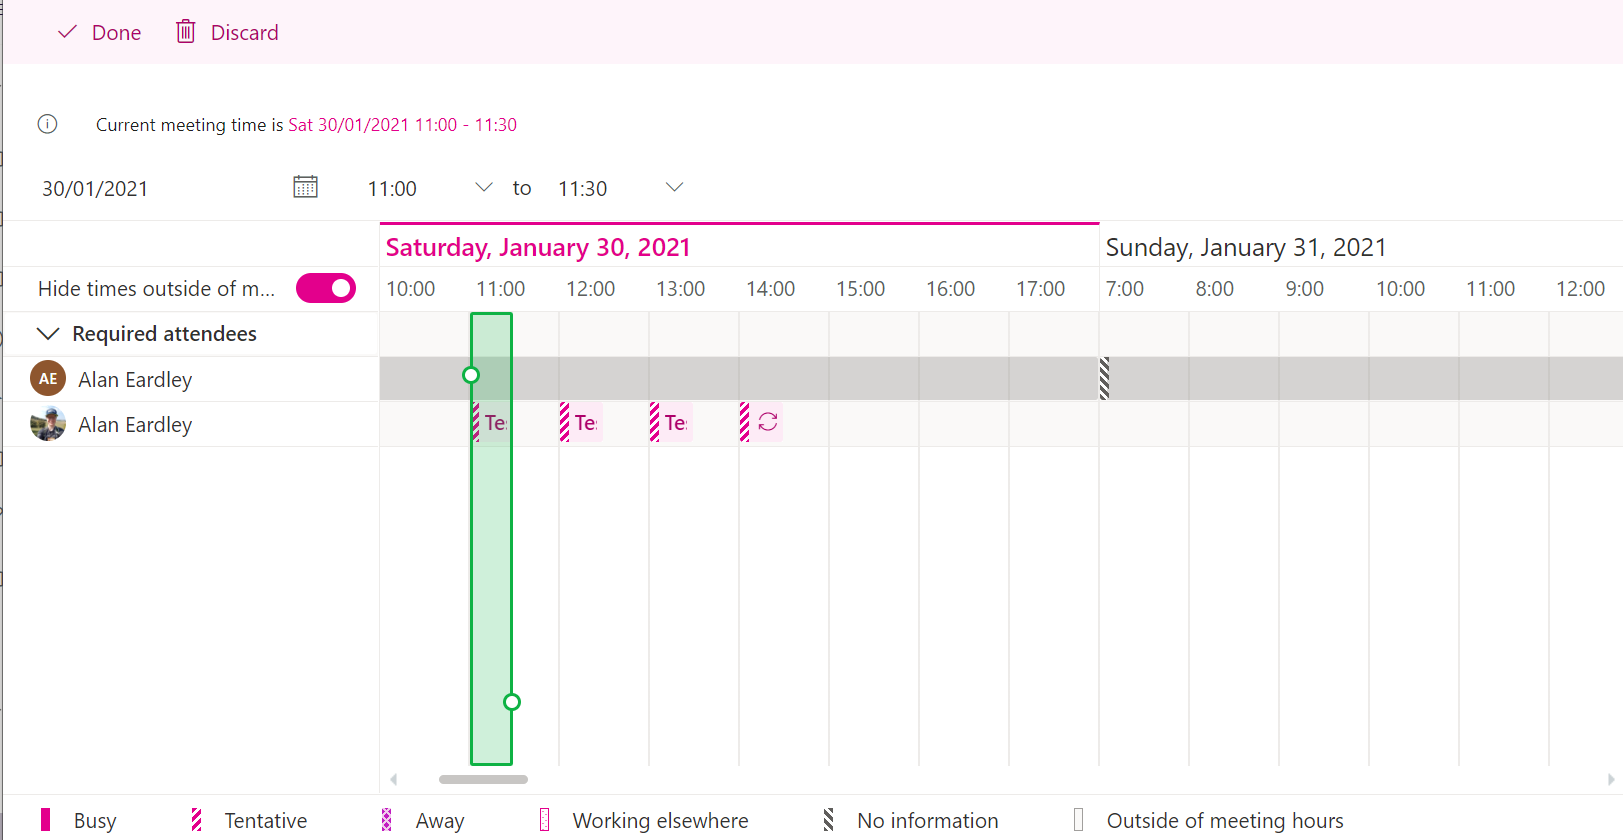 Image showing scheduling assisstant